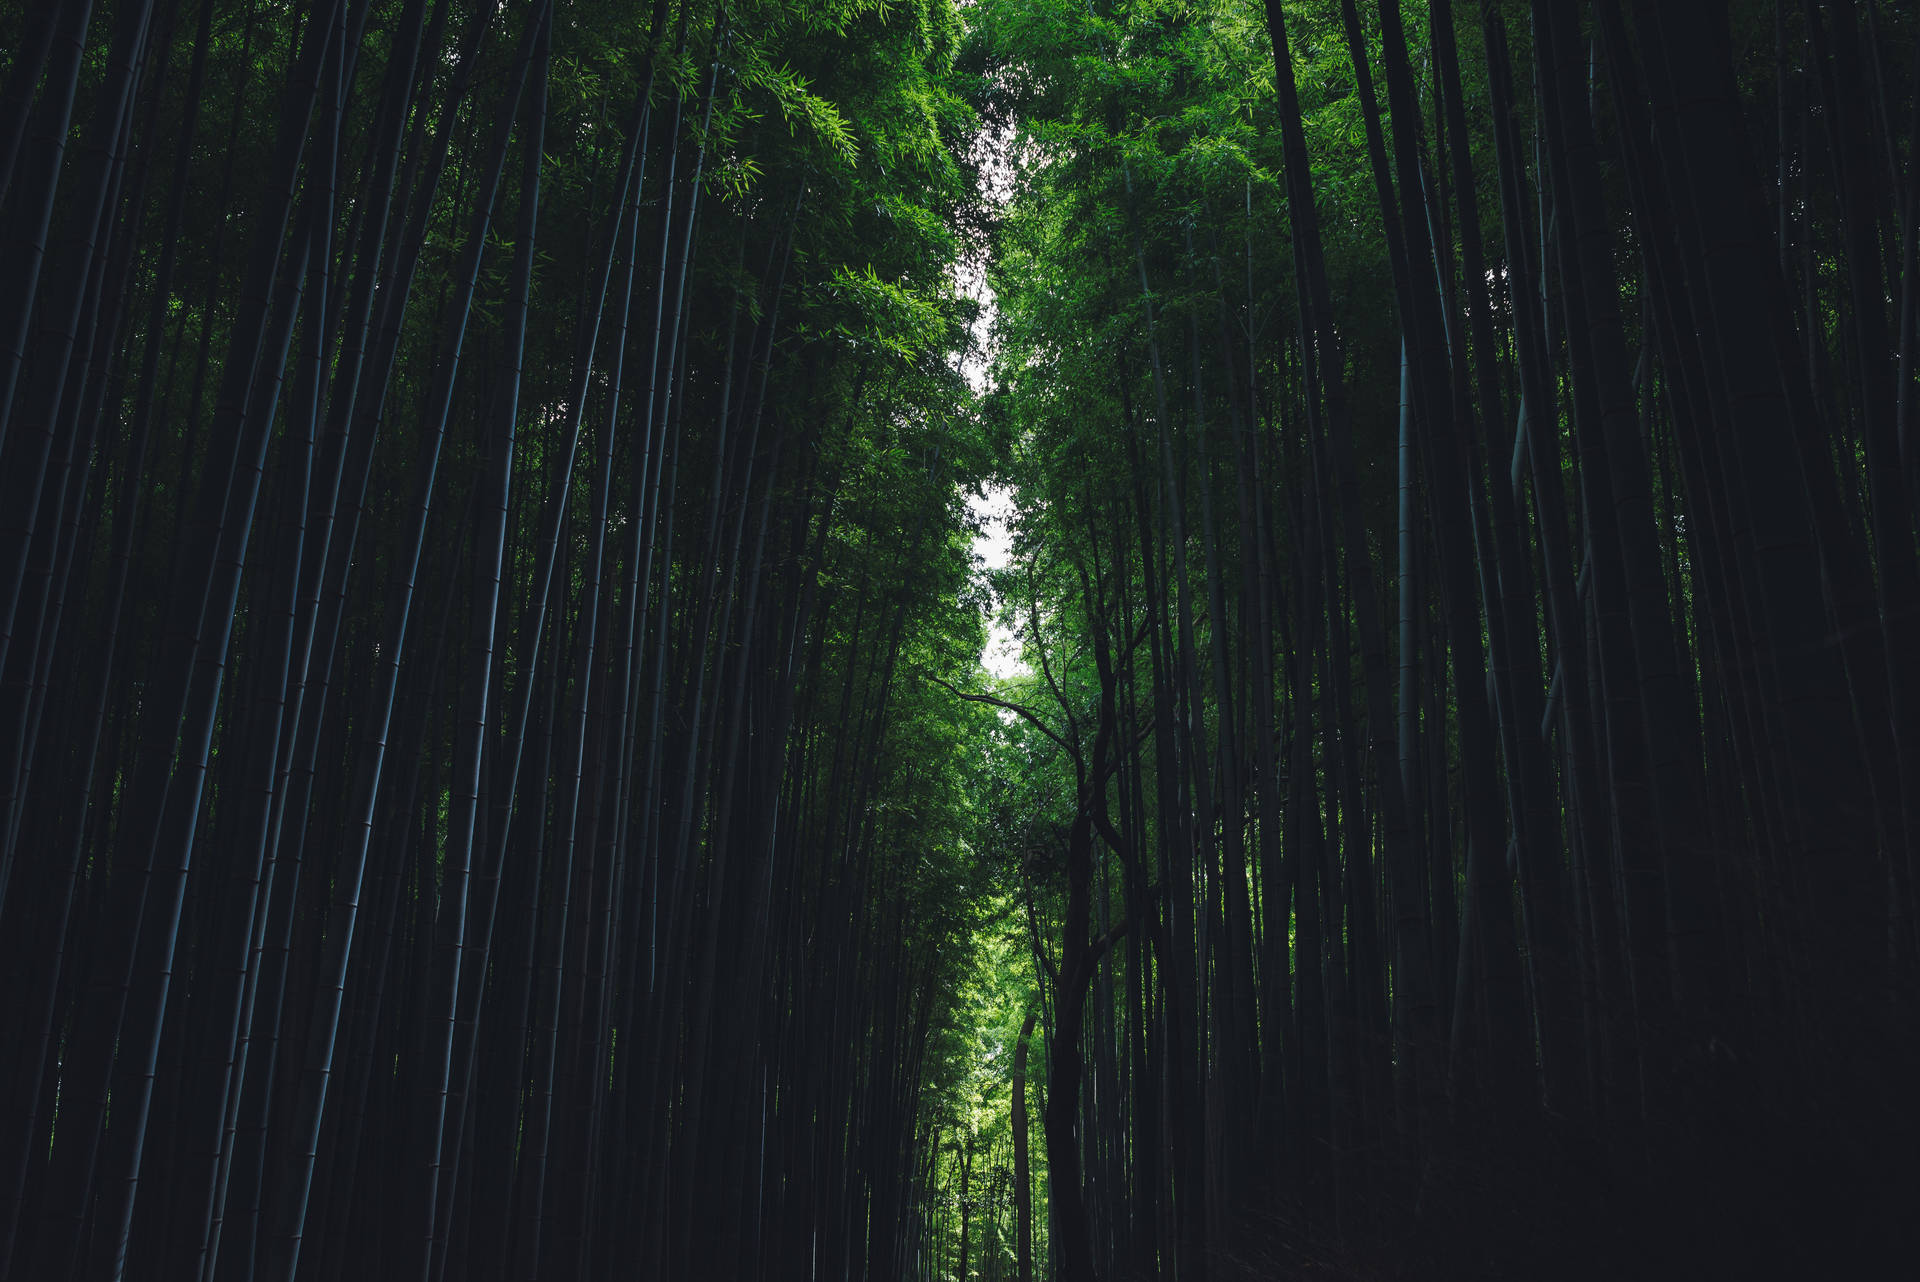 Bamboo Pathway In Forest